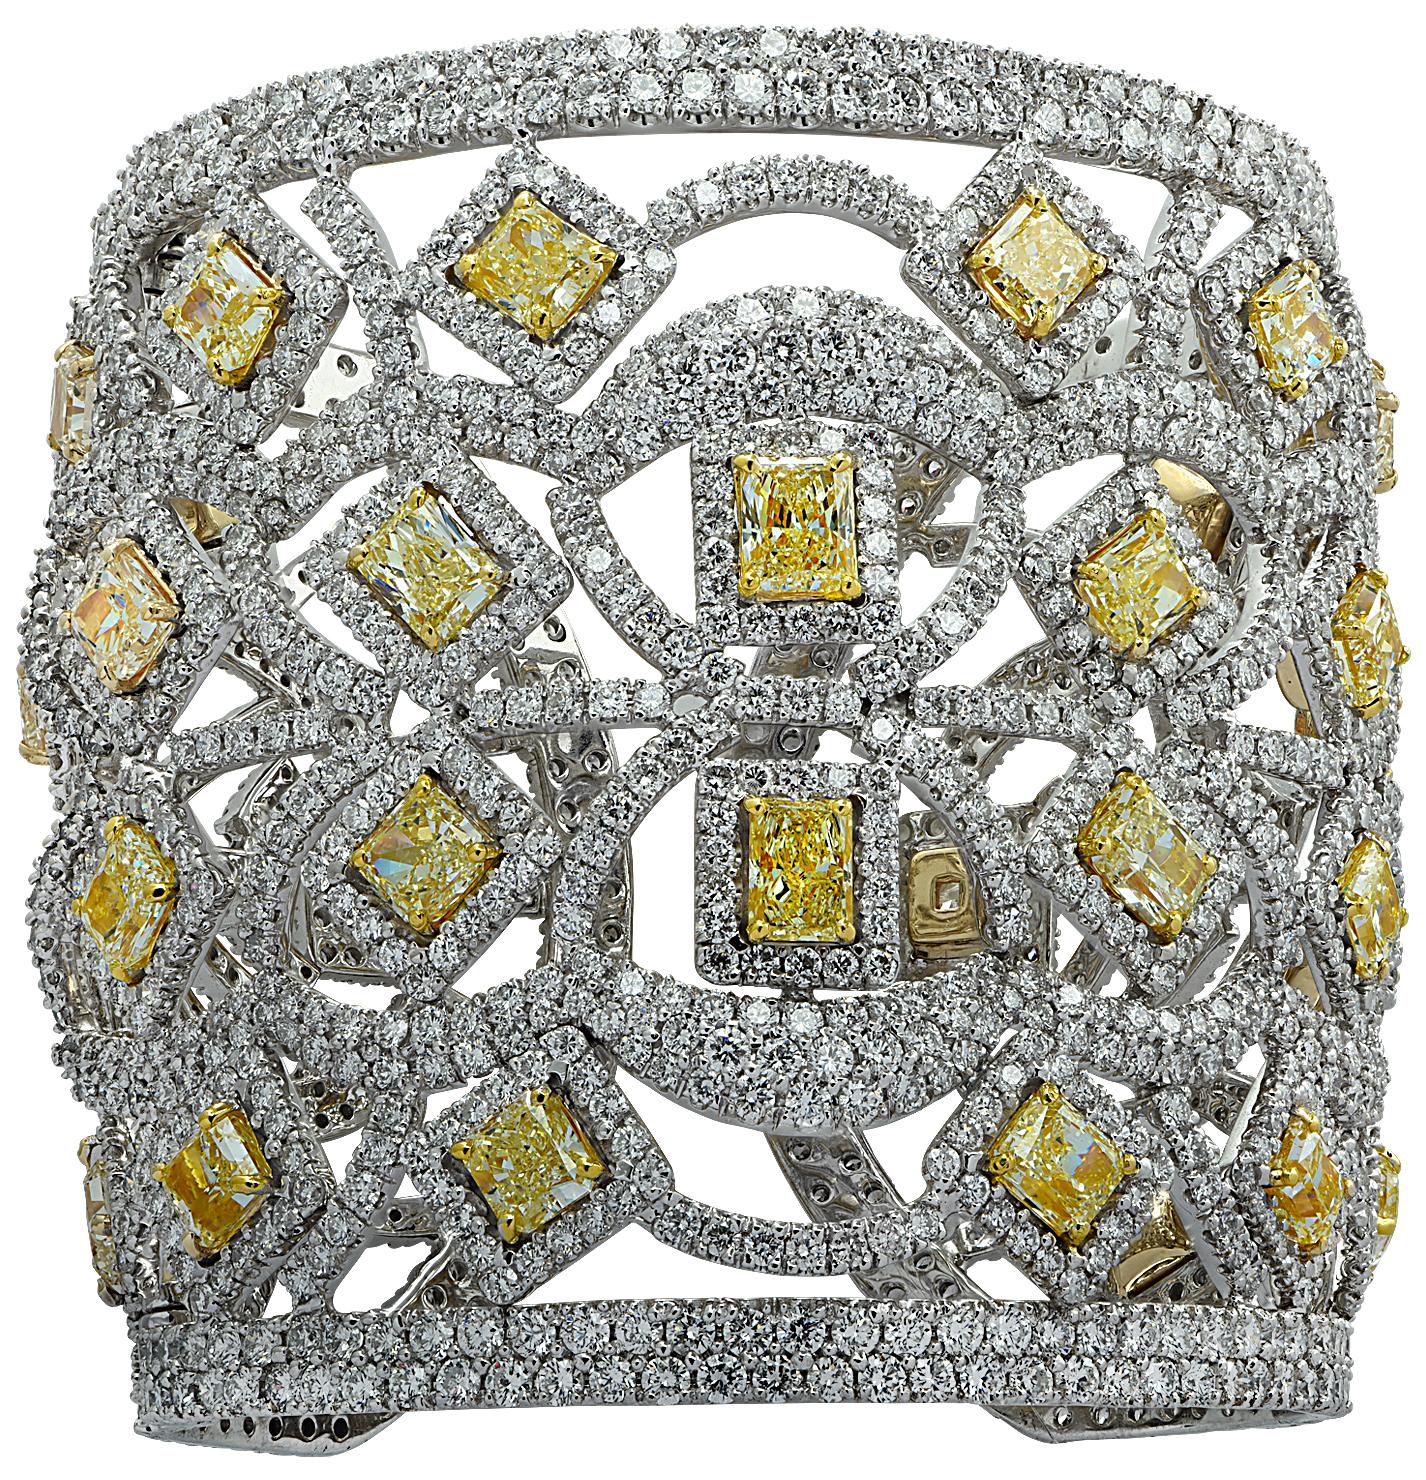 Spectacular Diamond cuff bangle crafted in 18 karat white and yellow gold, showcasing fancy yellow radiant cut and round brilliant cut diamonds weighing approximately 72.44 carats total. 32 Light yellow Radiant cut diamonds weighing approximately